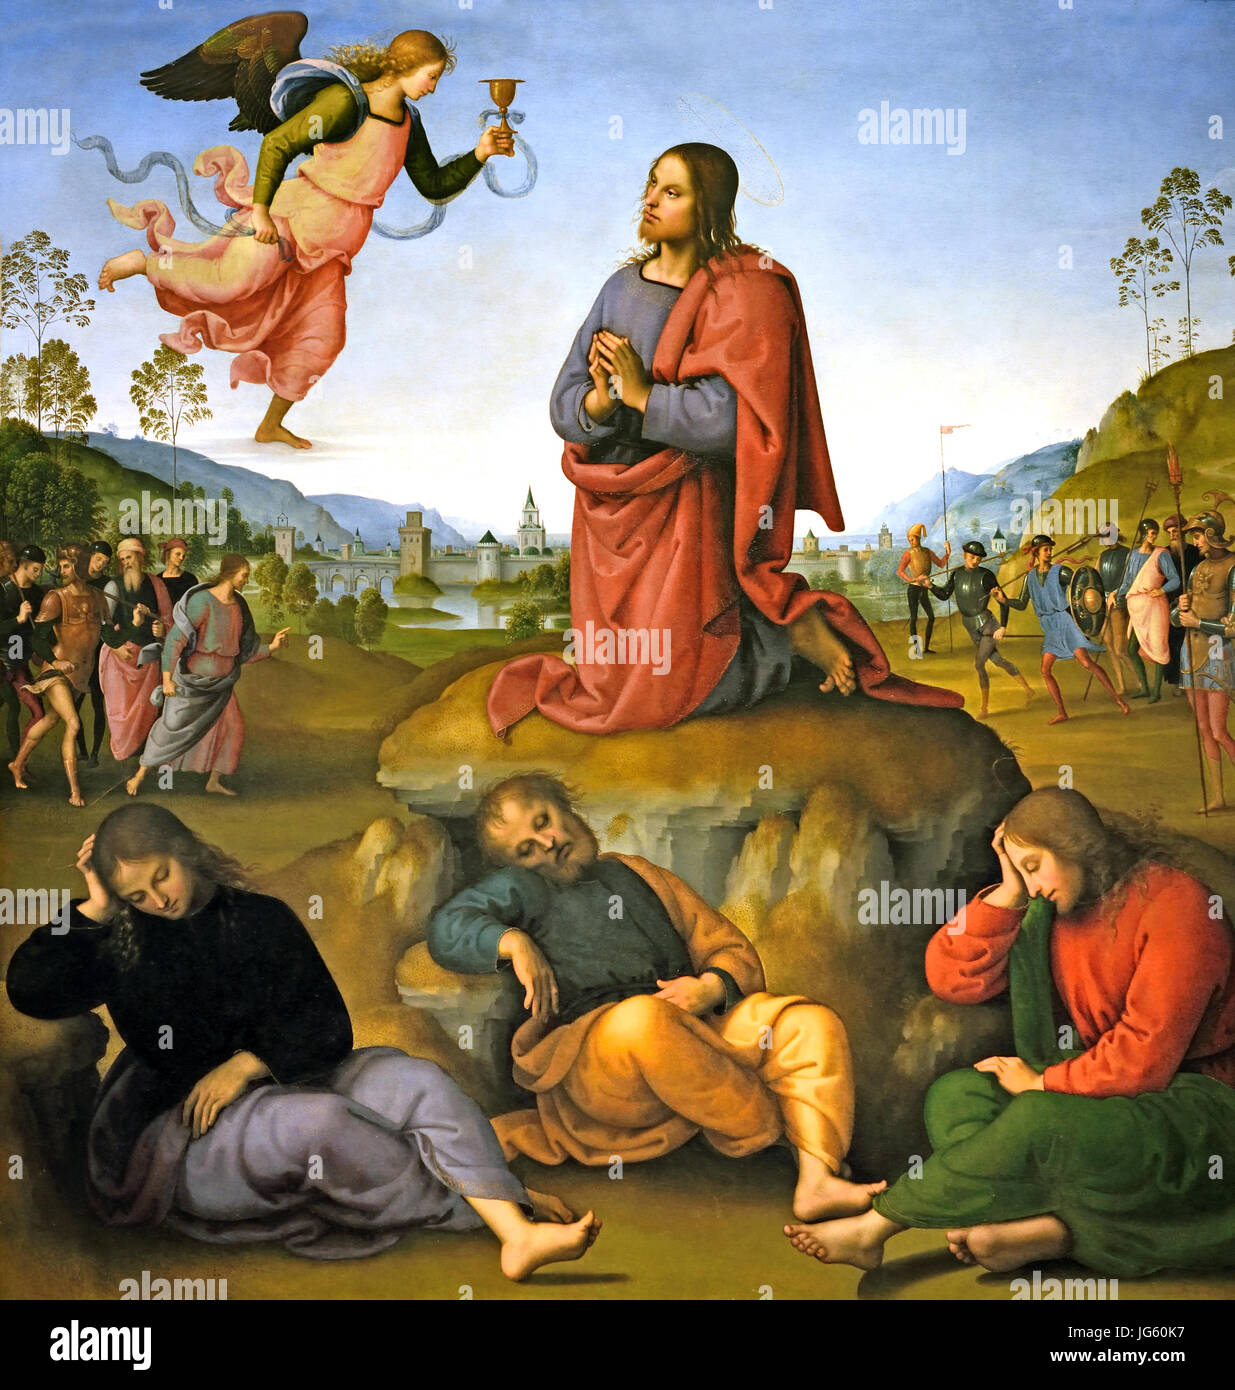 The Agony in the Garden 1492 Pietro Perugino 1446/1452 – 1523 born Pietro Vannucci, Italian Renaissance painter of the Umbrian school, Italy ( Christ is portrayed in center of the panel above a clear sky, kneeling in the Garden of Gethsemane and receiving by an angel a divine chalice. His figure forms a triangle with the three sleeping apostles at the bottom (from the left, John, Peter and James); the triangle is connected to the painting's sides by the symmetrical line of the hills. Behind Jesus is a lake landscape, a typical element of the Italian painting at the time, with a fortified city Stock Photo